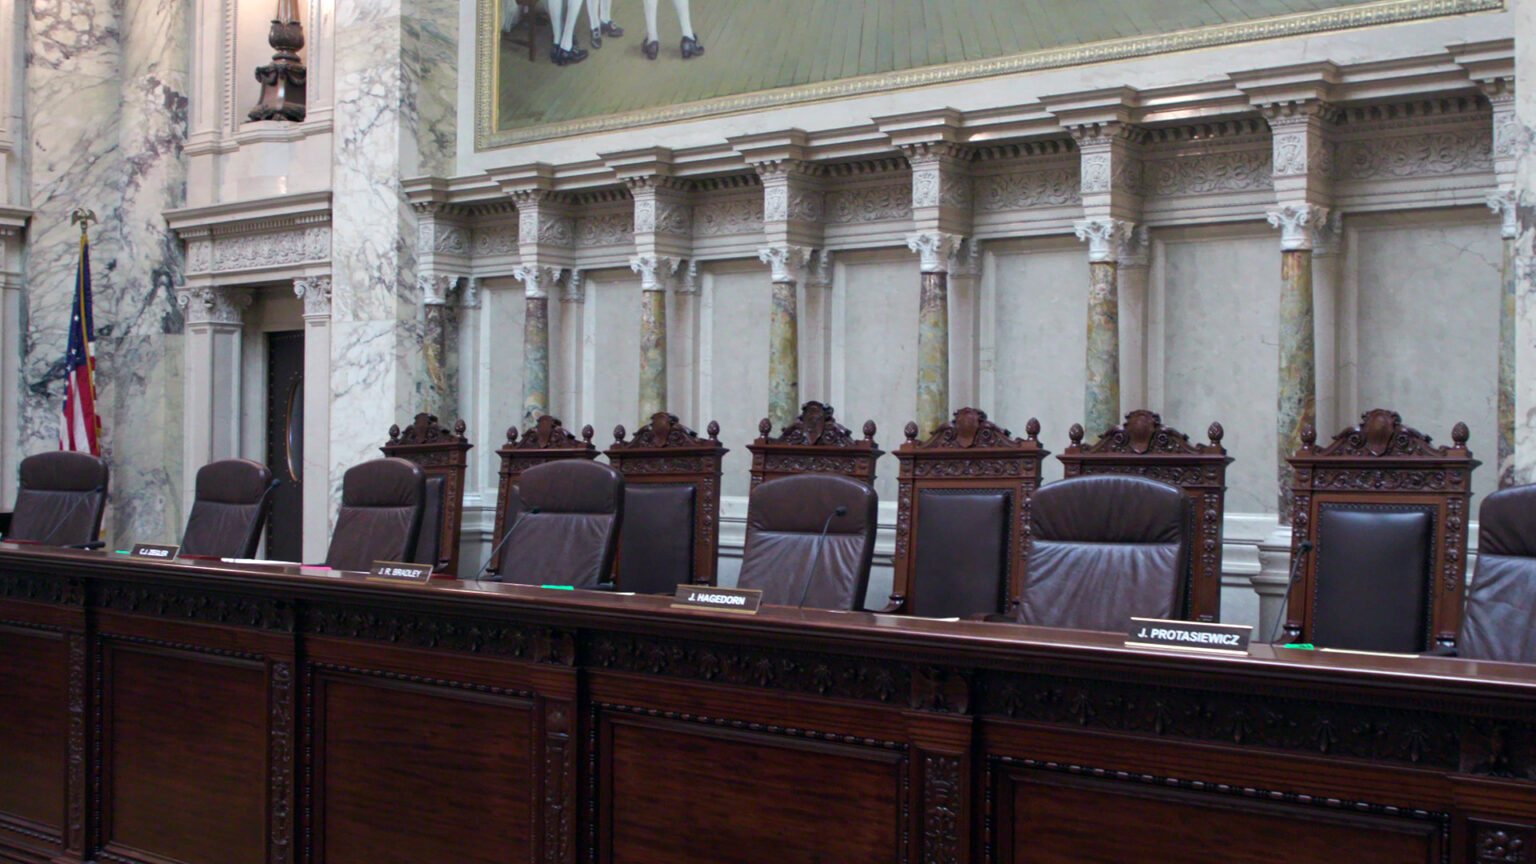 Seven high-backed leather chairs behind a wood bench with nameplates in front of each sit empty, with another row of high-backed wood and leather chairs in the background, in a room with marble masonry, pillars, a large painting and a U.S. flag.